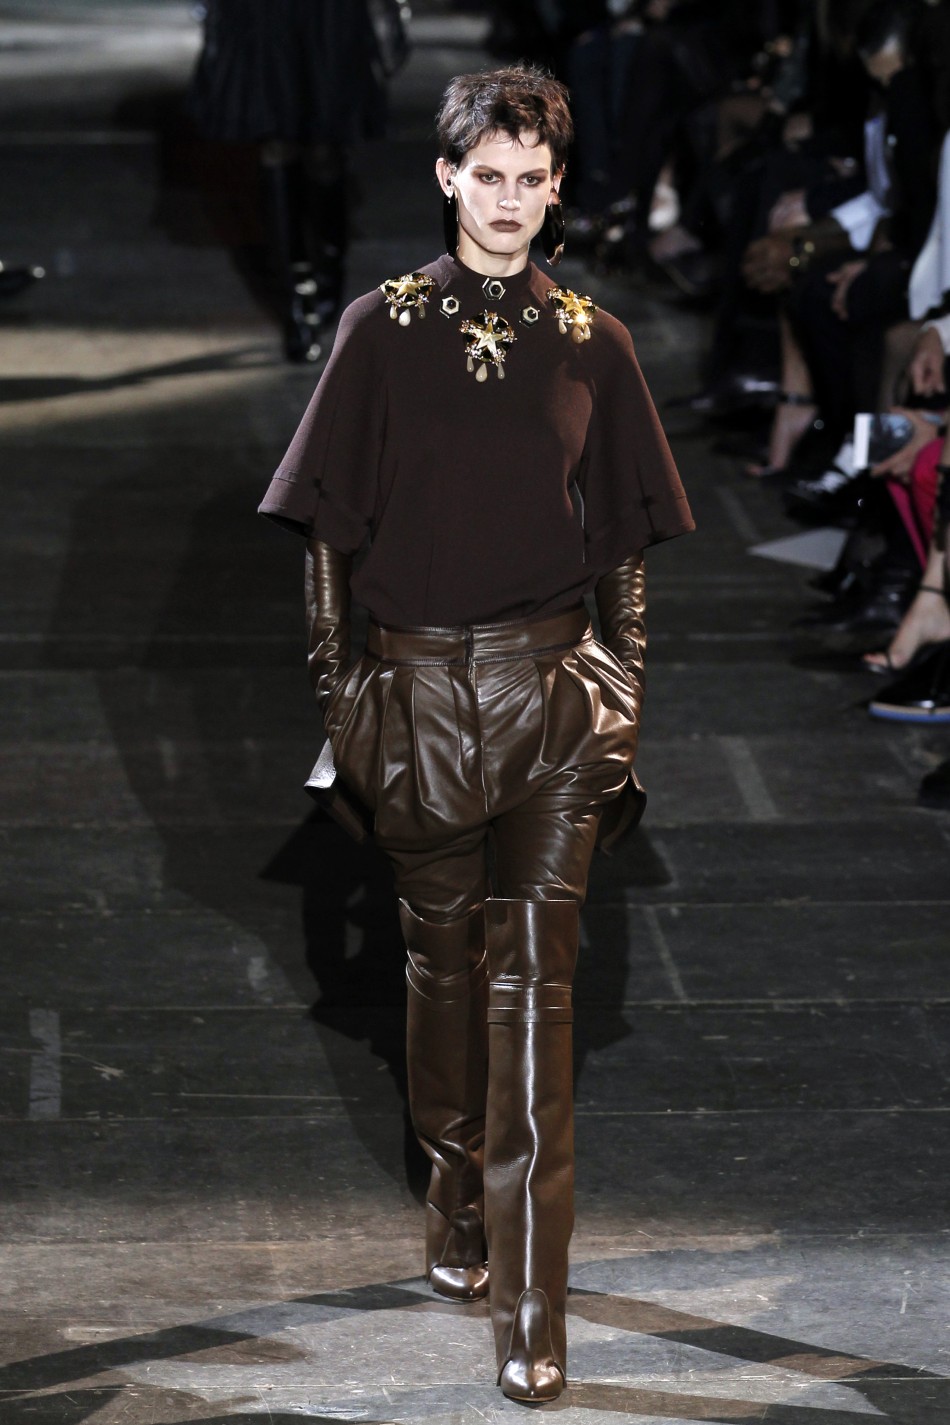 Riccardo Tiscis Equestrian Collection for Givenchy at Paris Fashion Week